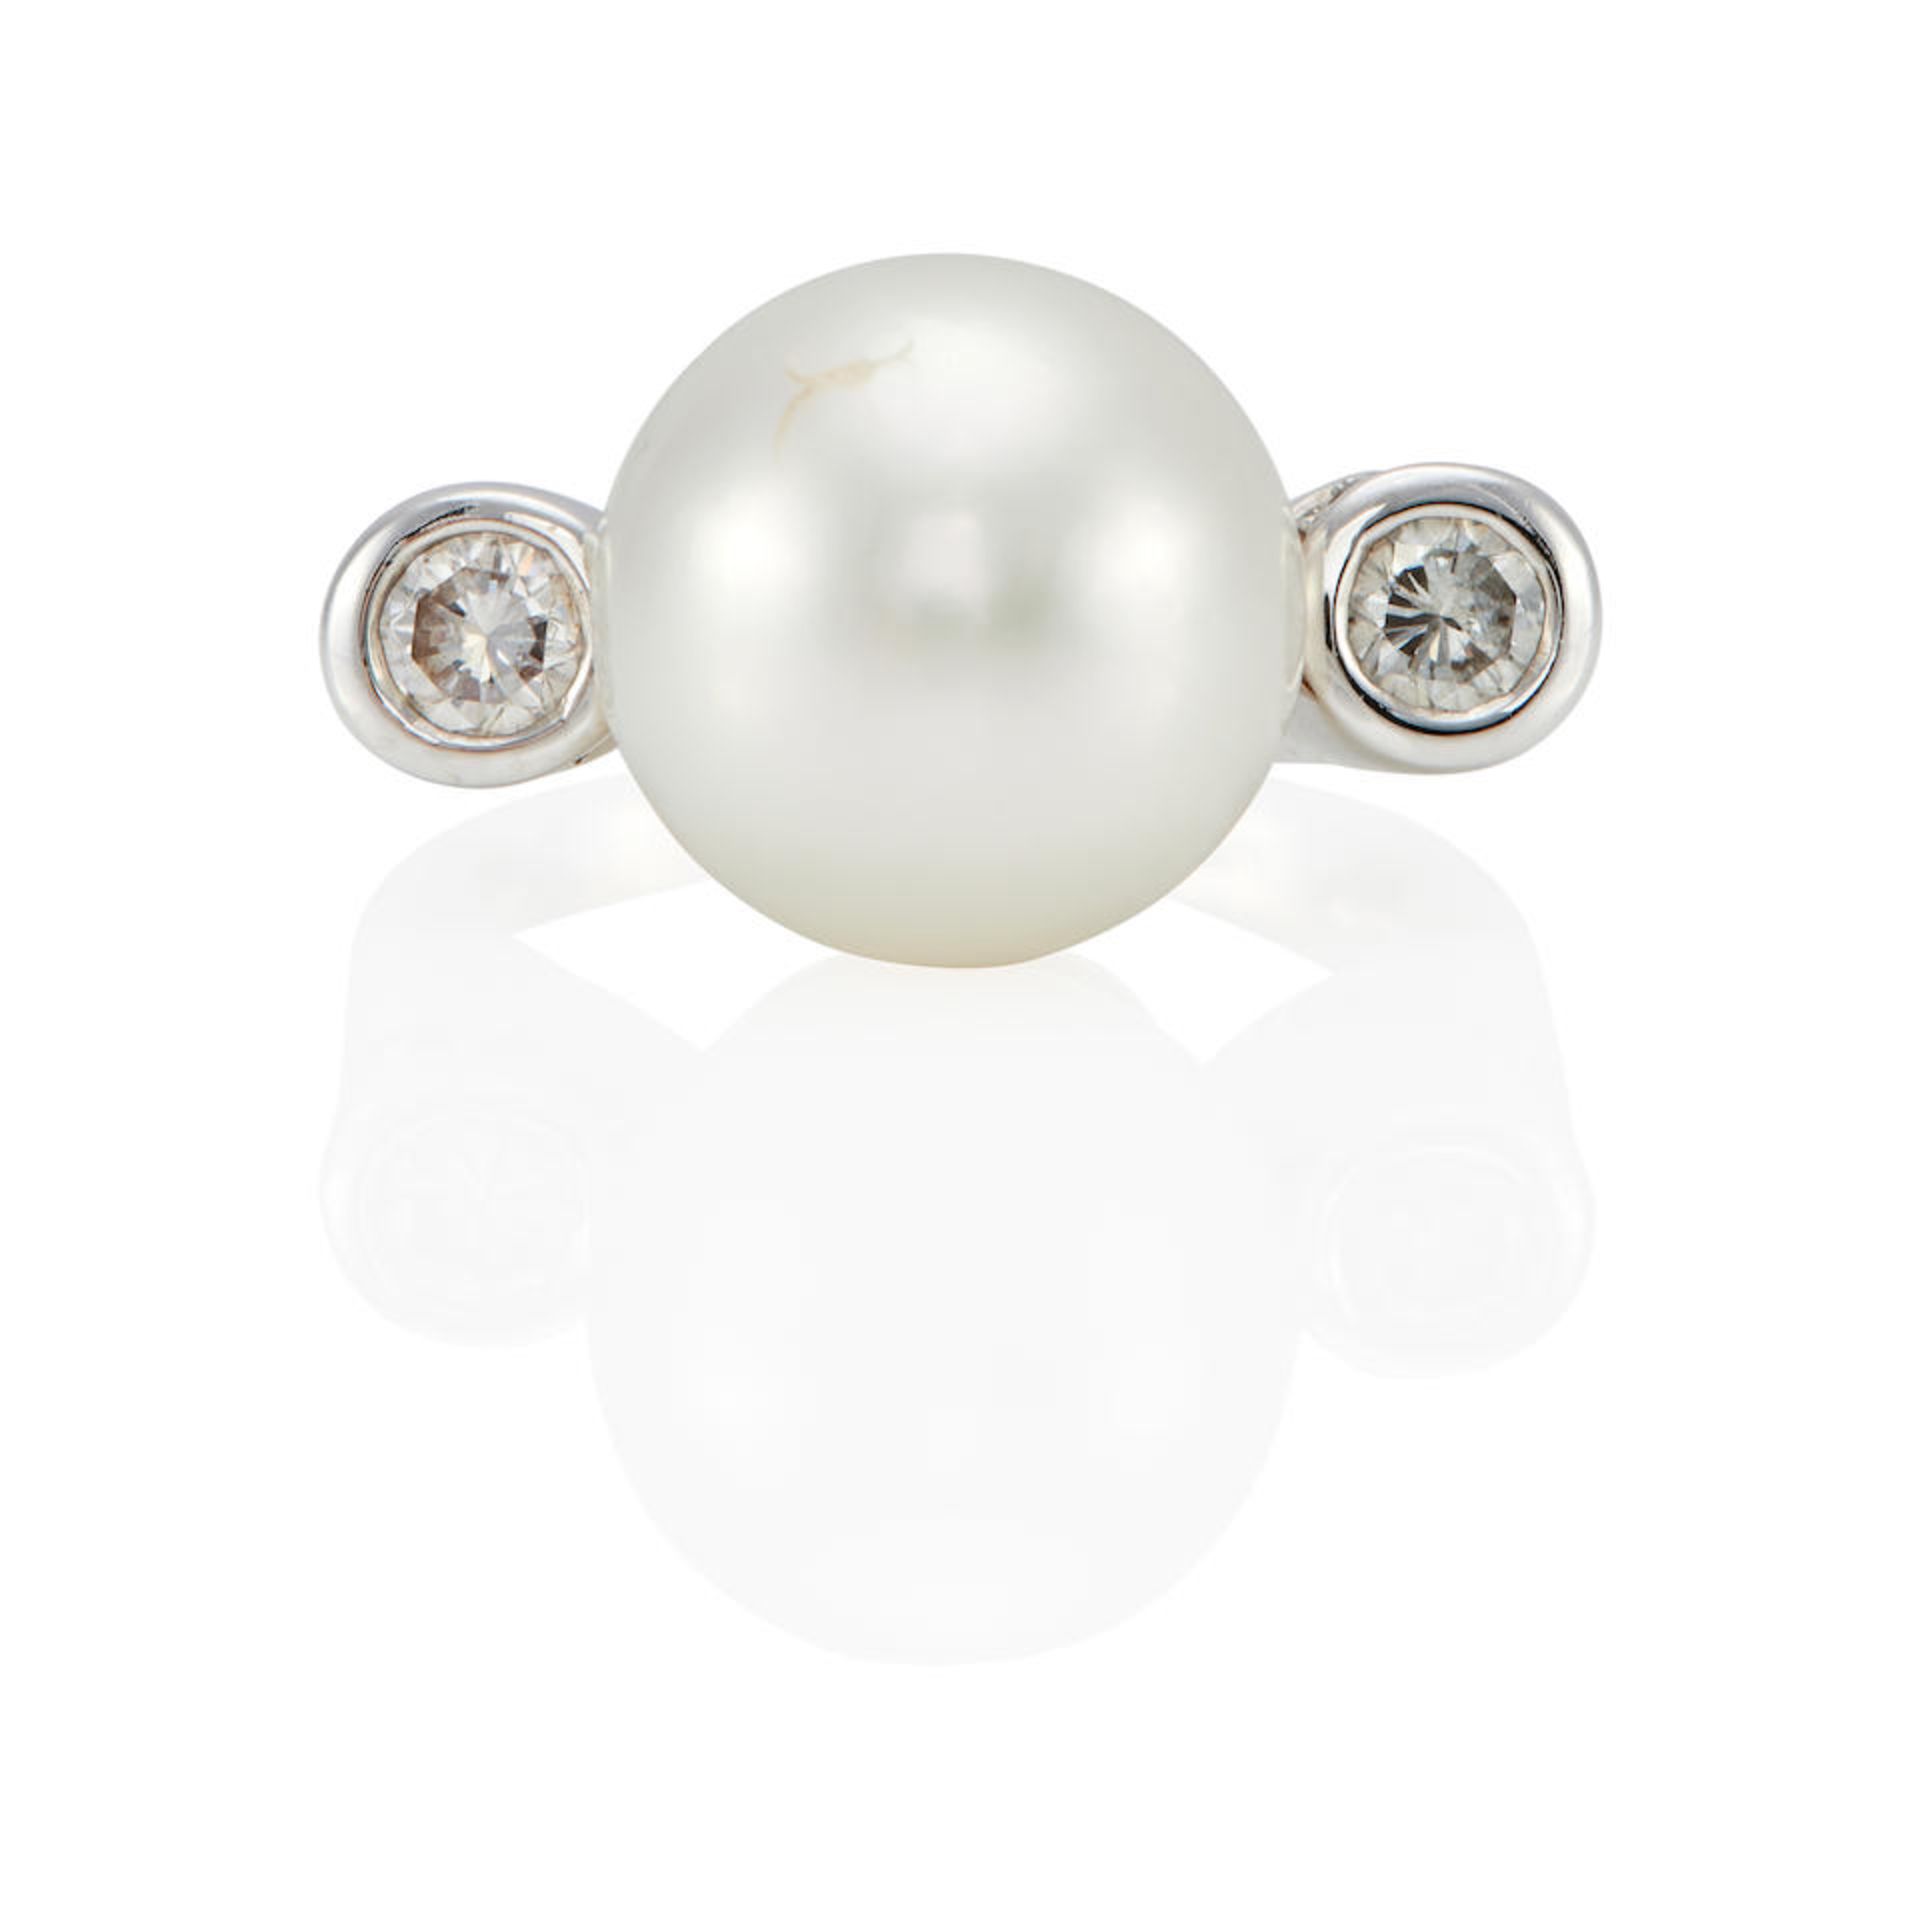 AN 18K WHITE GOLD, SOUTH SEA CULTURED PEARL AND DIAMOND RING